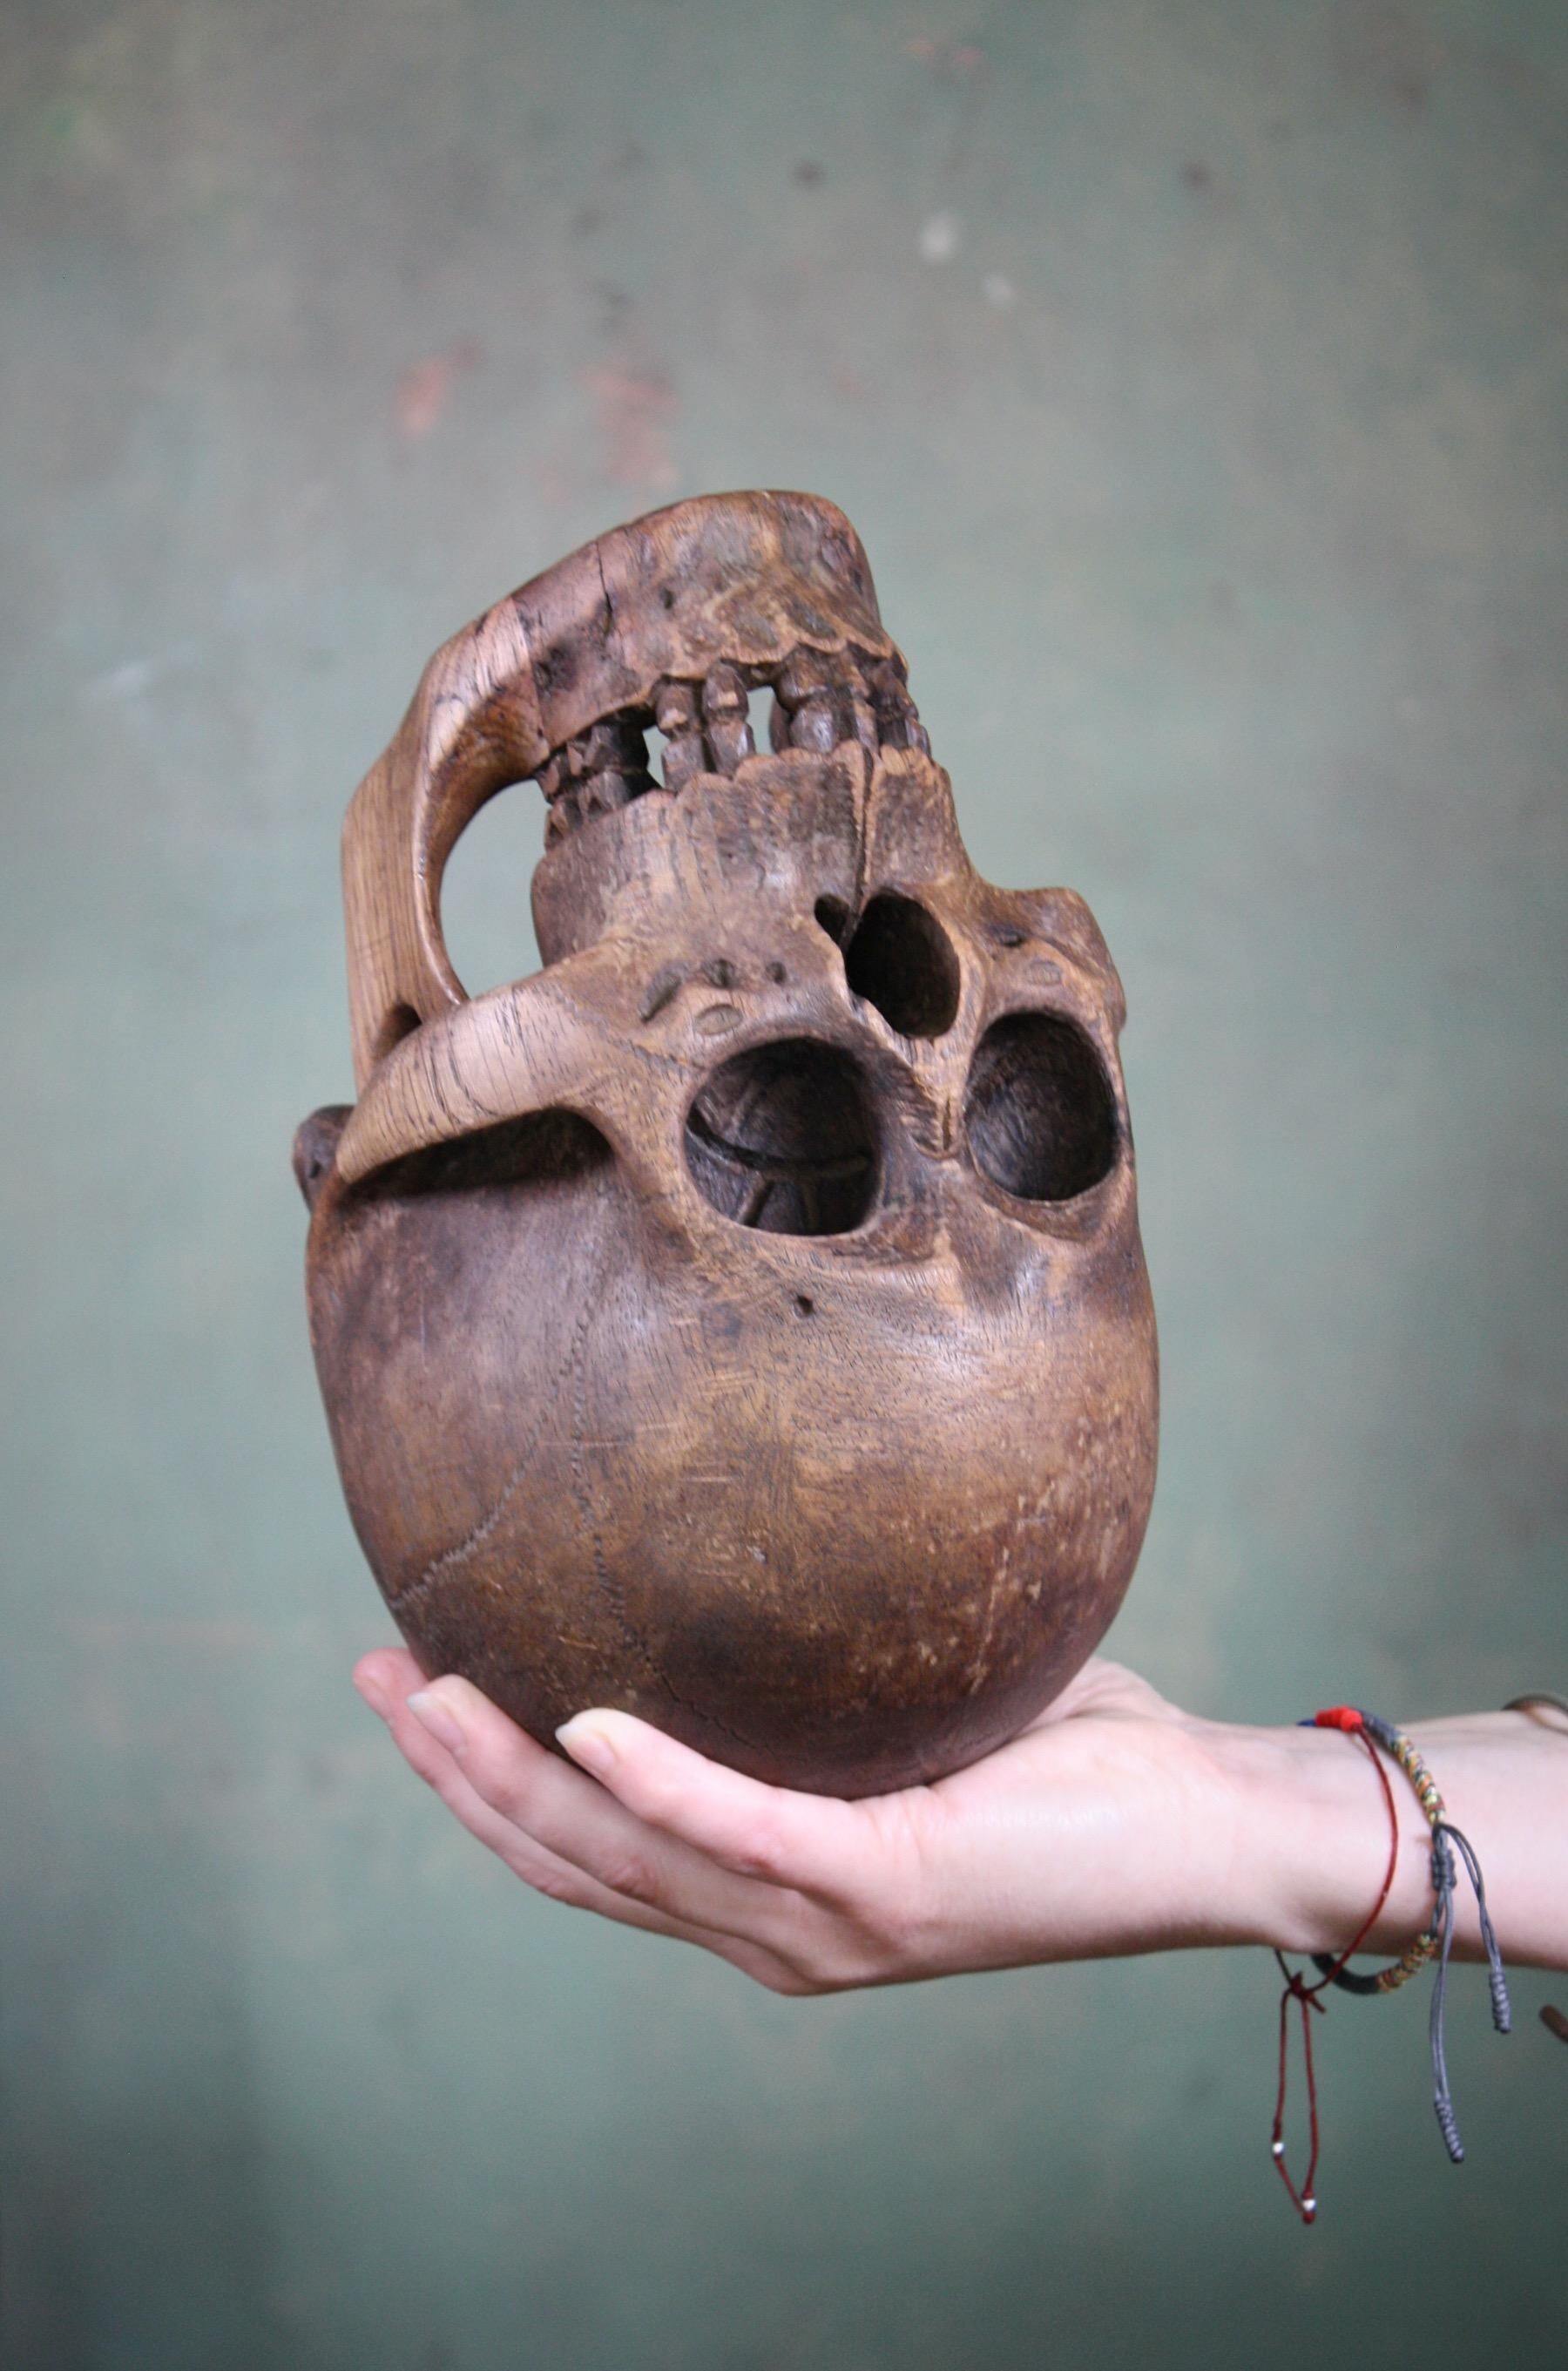 European Late 19th-Early 20th Century Life-Size Treen Carved Memento Mori Human Skull